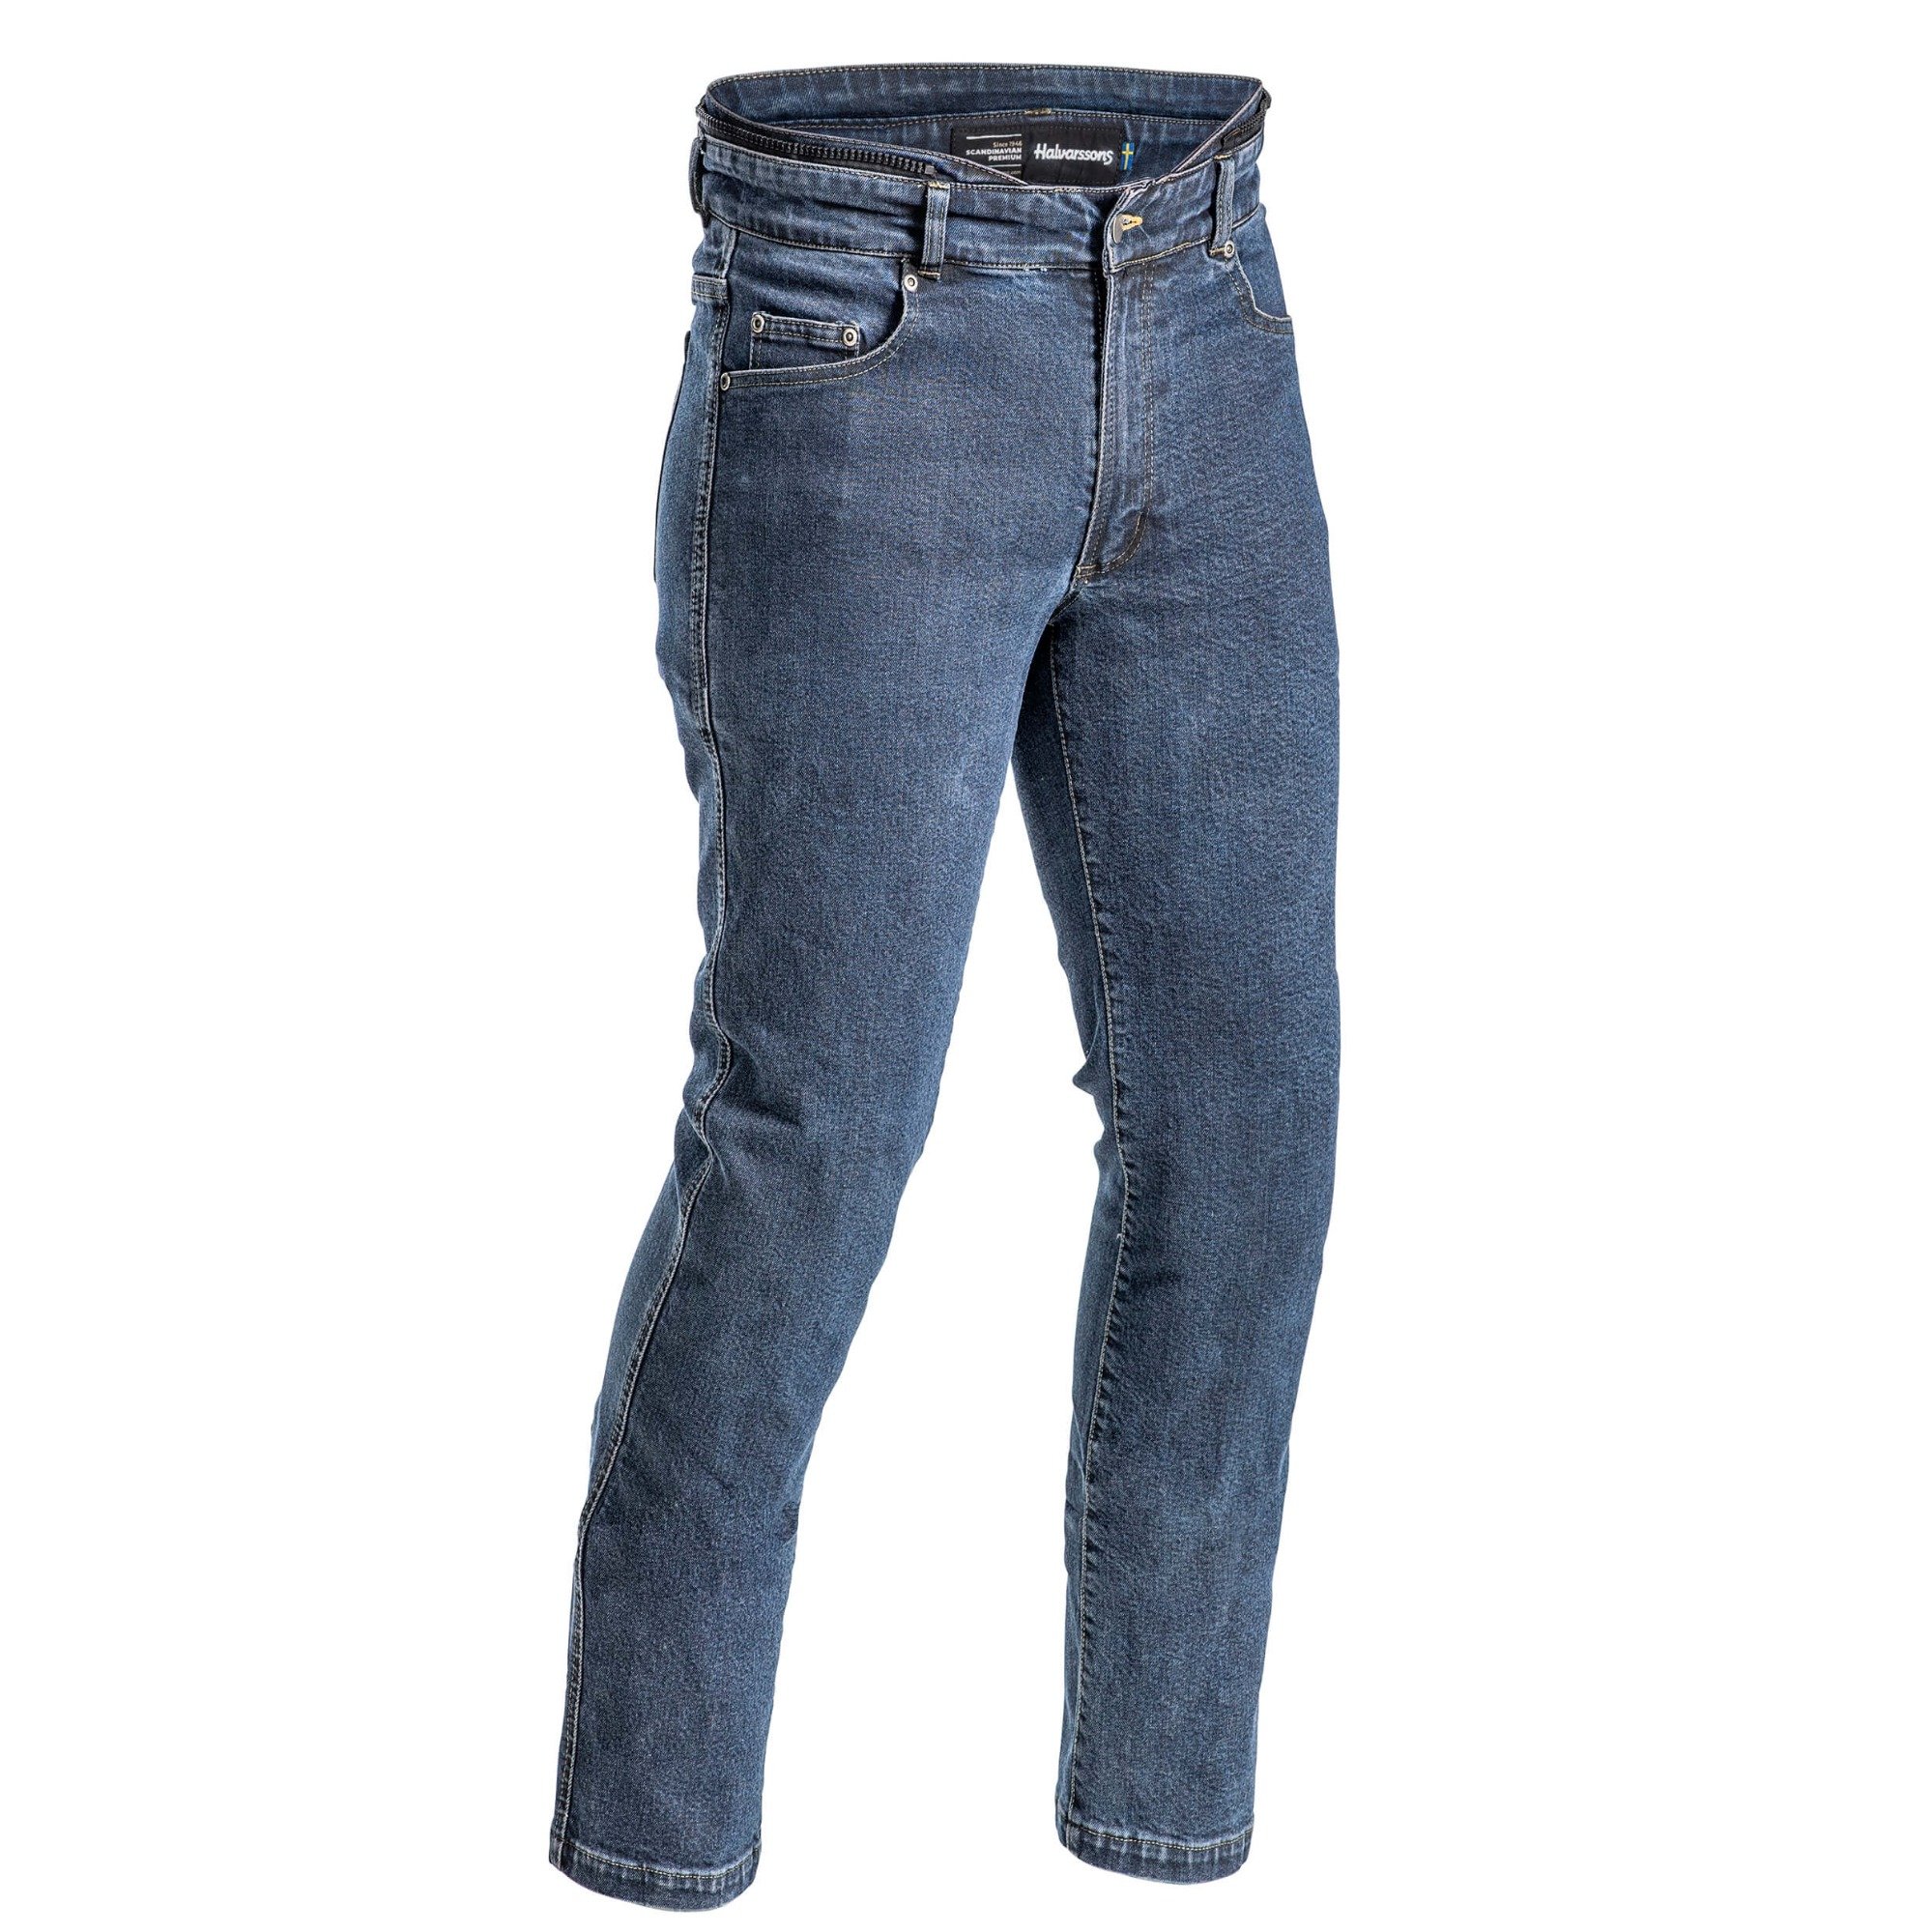 Image of Halvarssons Jeans Rogen Blue Size 60 ID 6438235239010